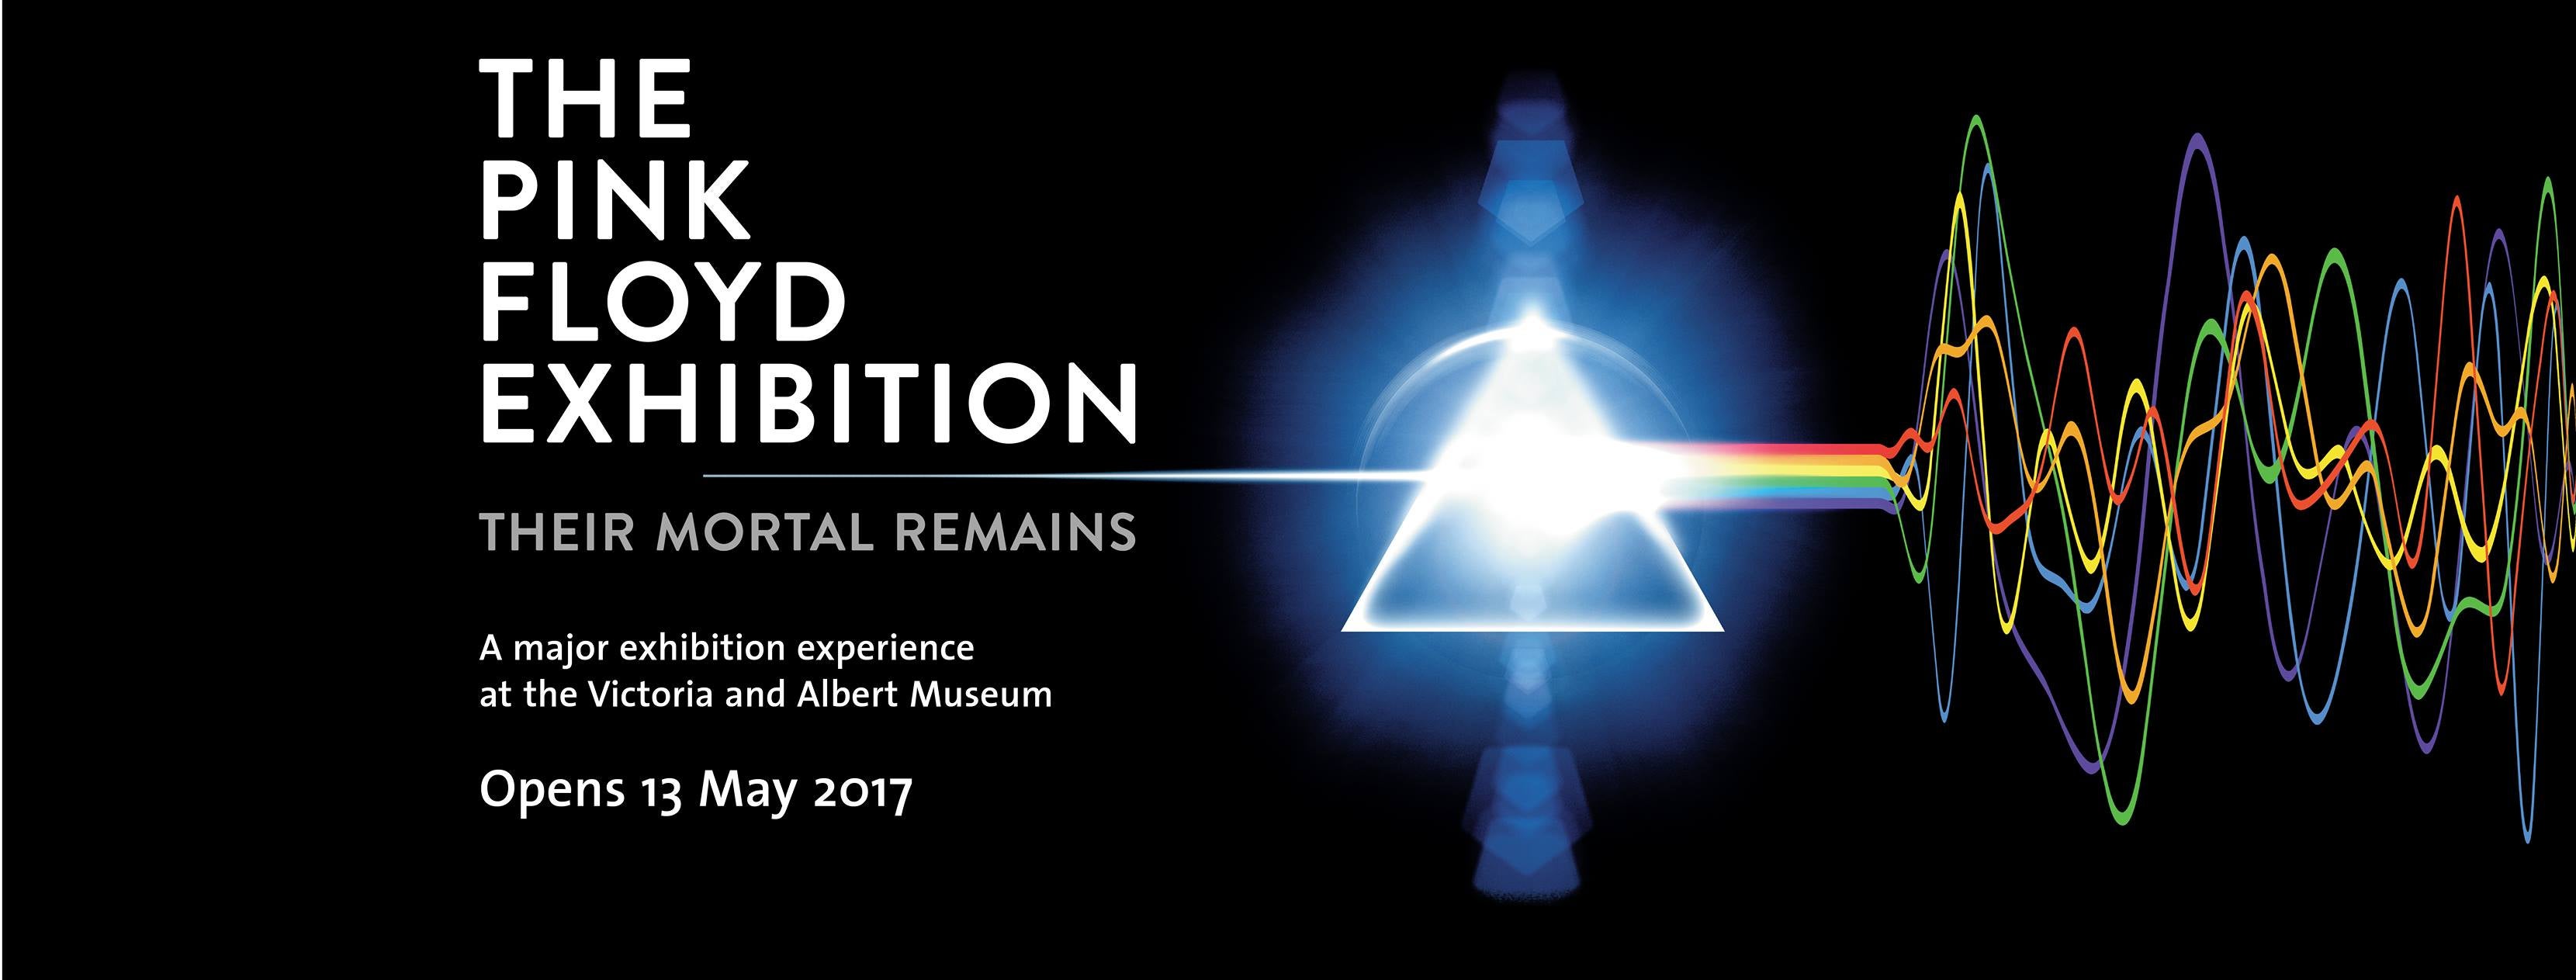 The Pink Floyd Exhibition: Their Mortal Remains - Facebook Live event